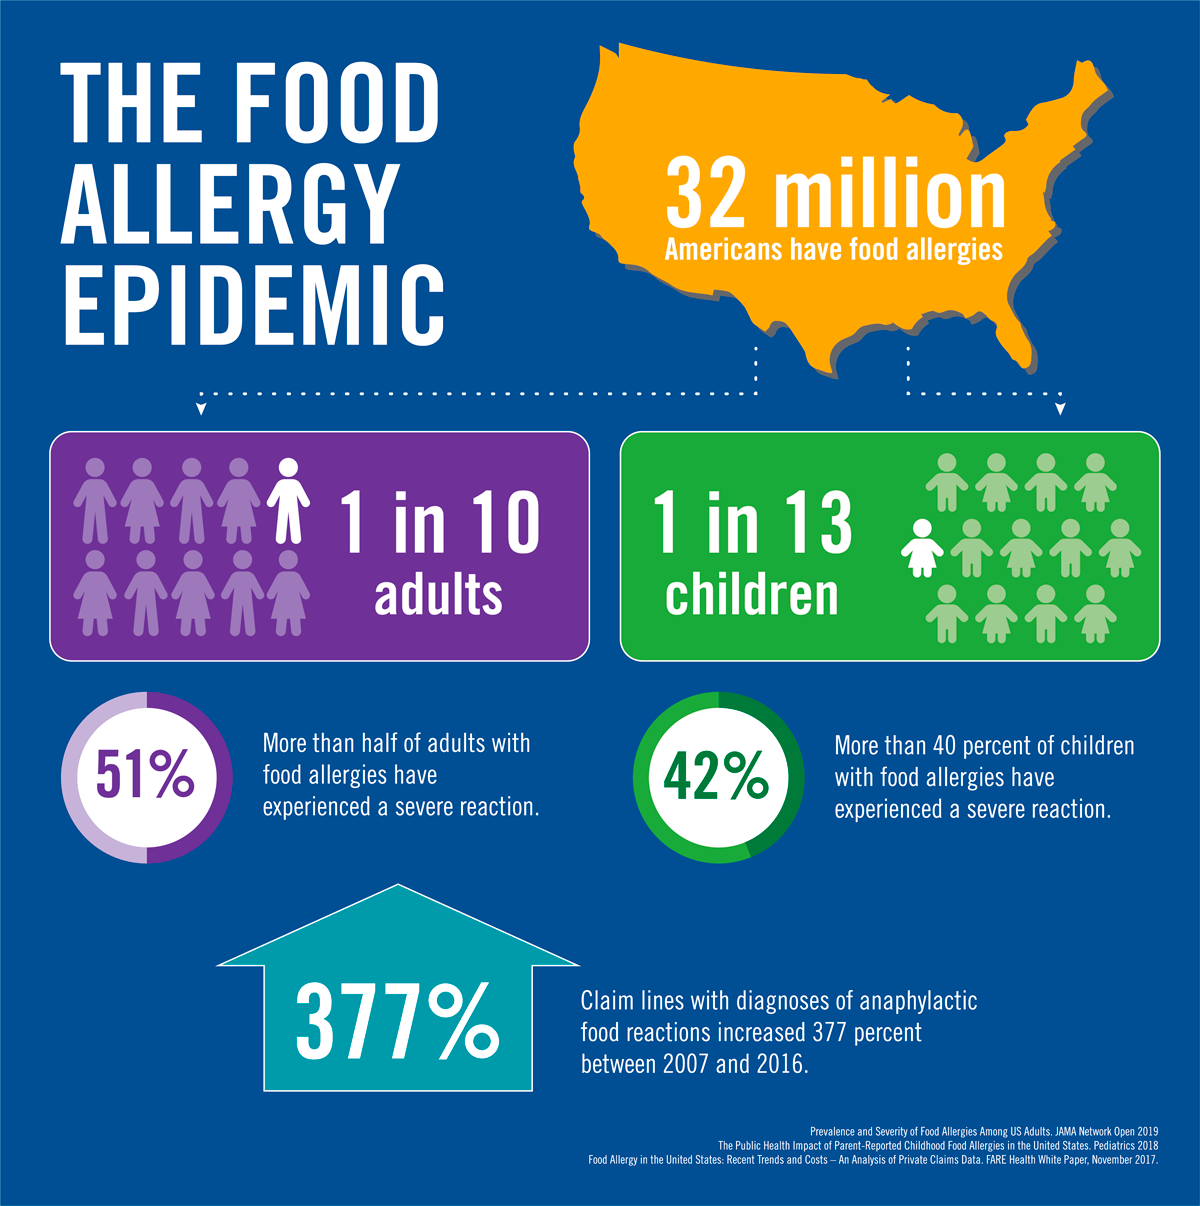 The food allergy epidemic